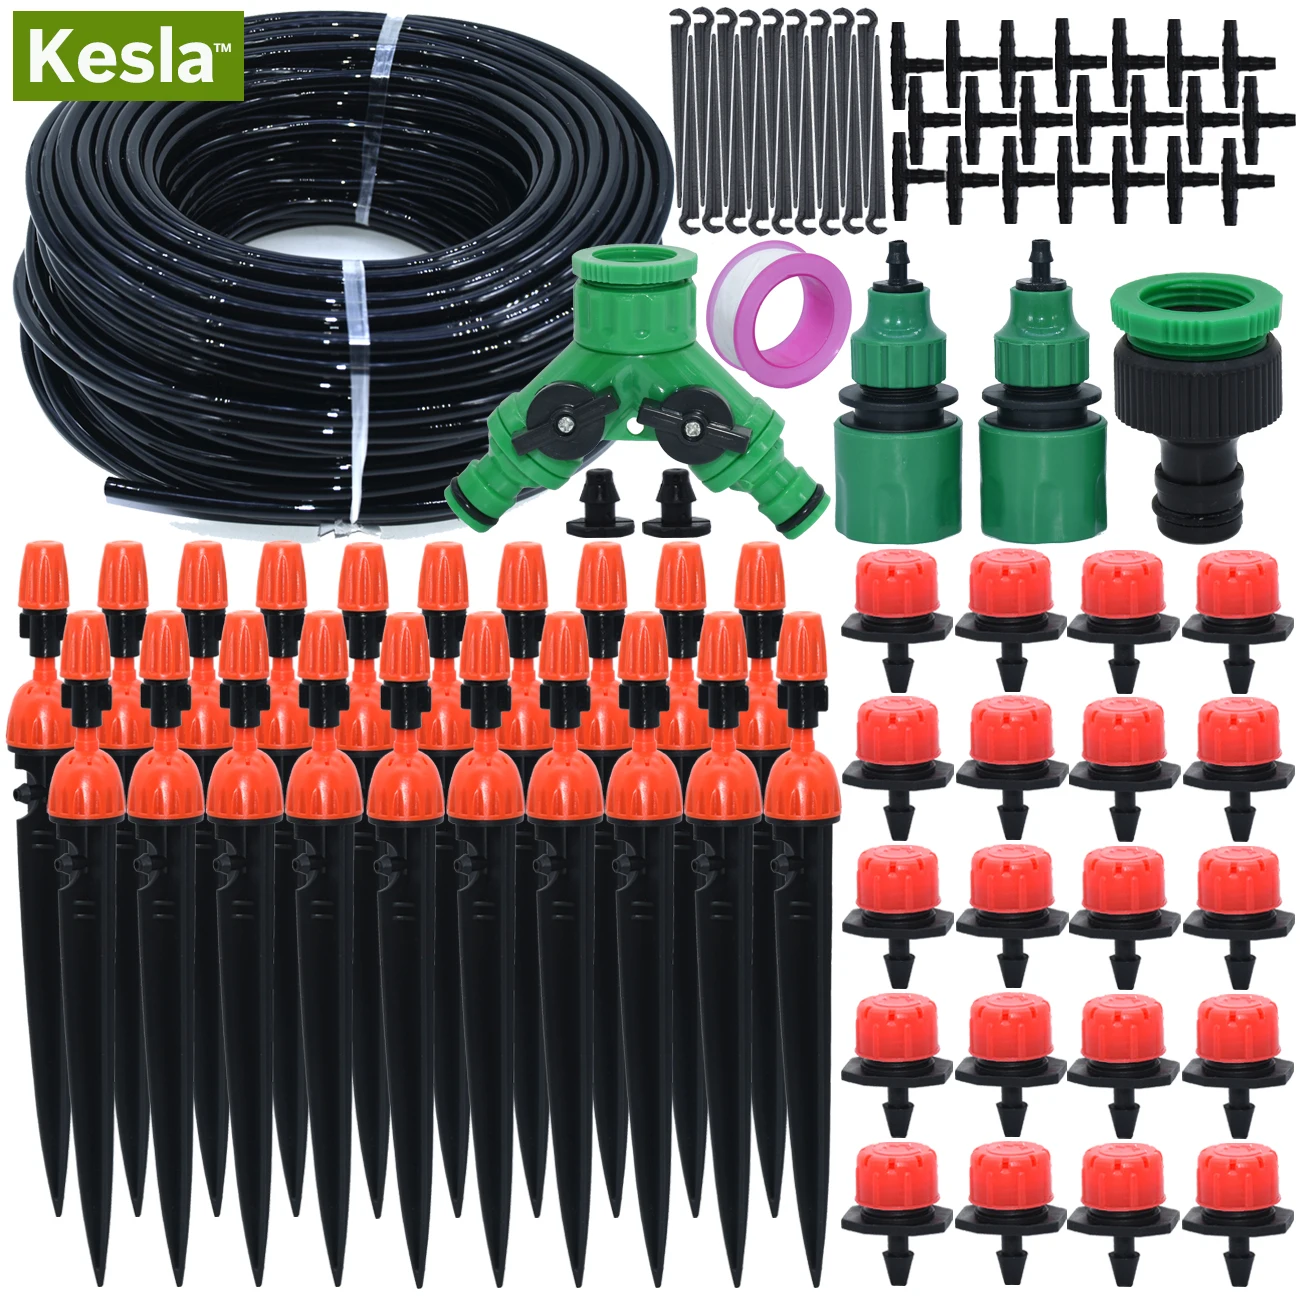 KESLA 5M-30M Drip Irrigation Watering Kits System Garden Greenhouse Automatic Adjustable Drippers 8 Outlets Sprinkler 4/7mm Hose | Дом и сад